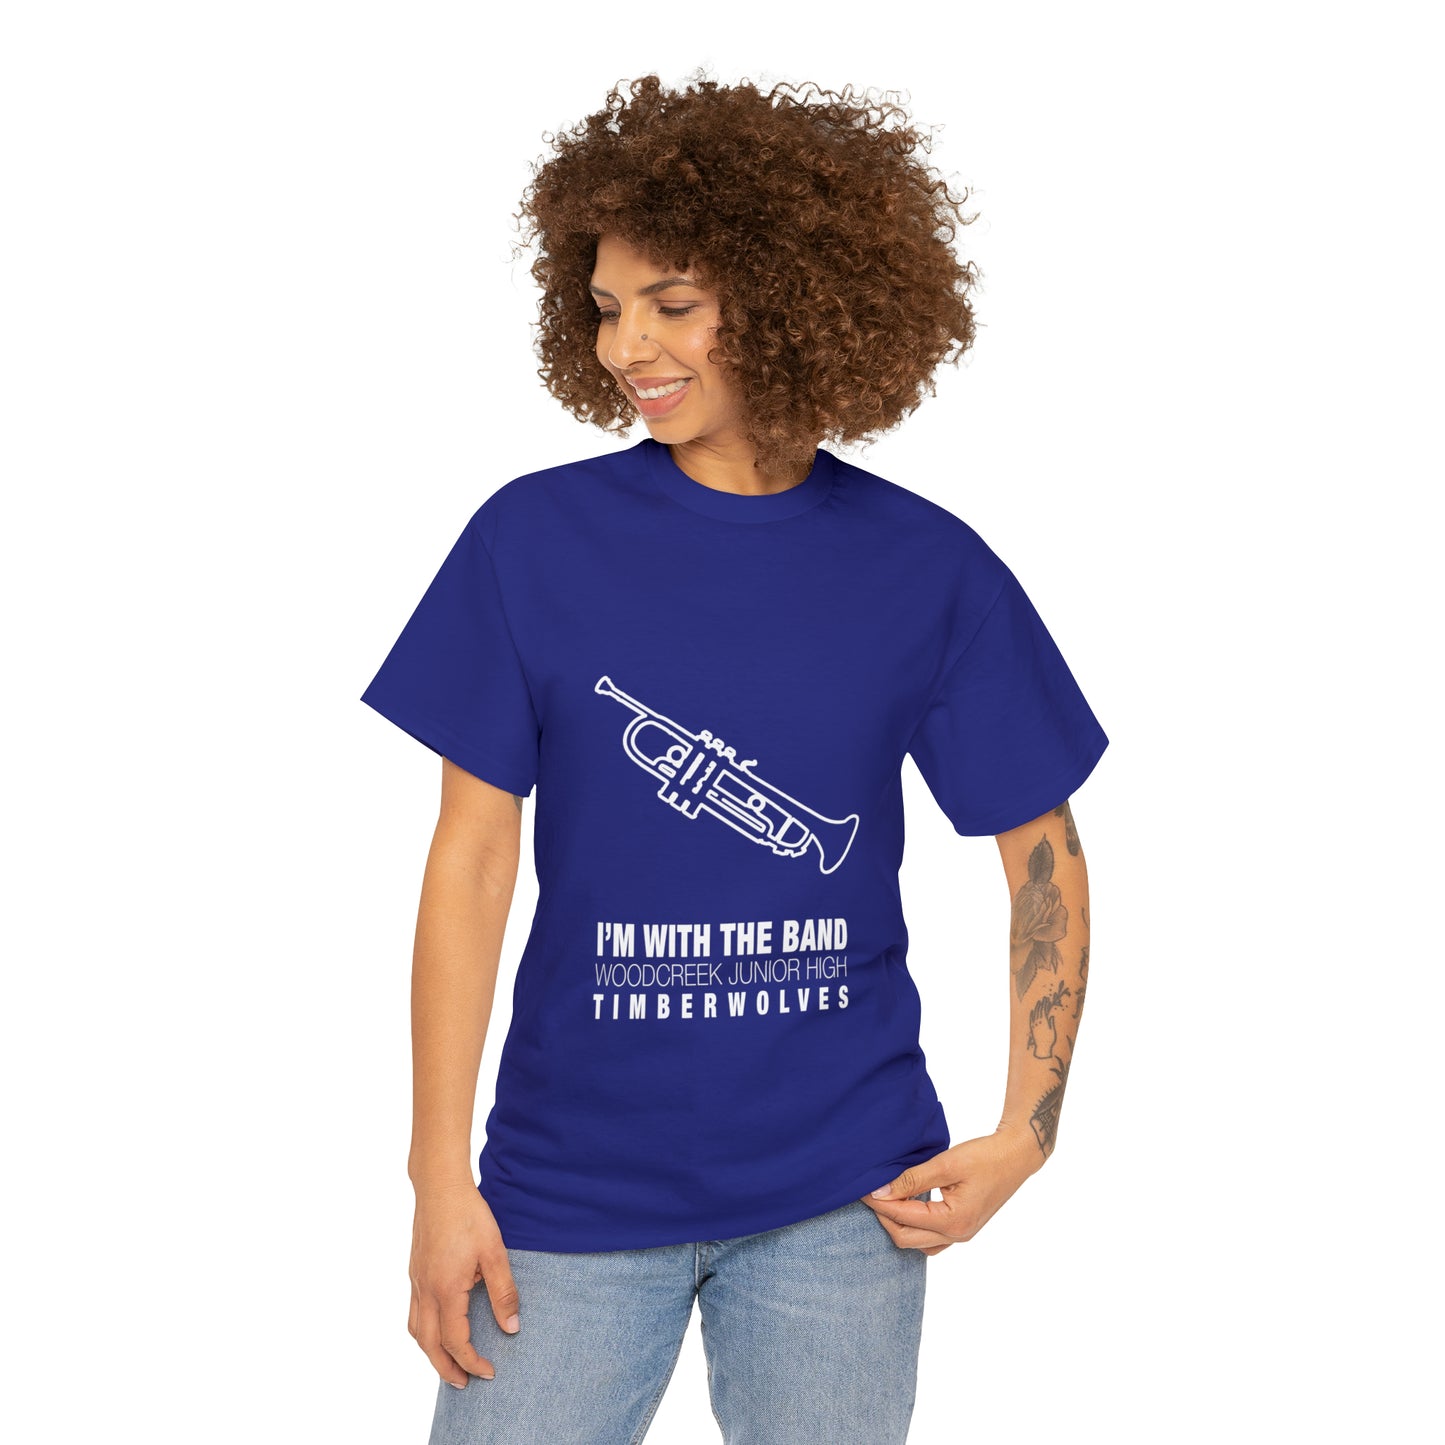 WCJH - I'M WITH THE BAND Adult Trumpet Tee (13 color options)